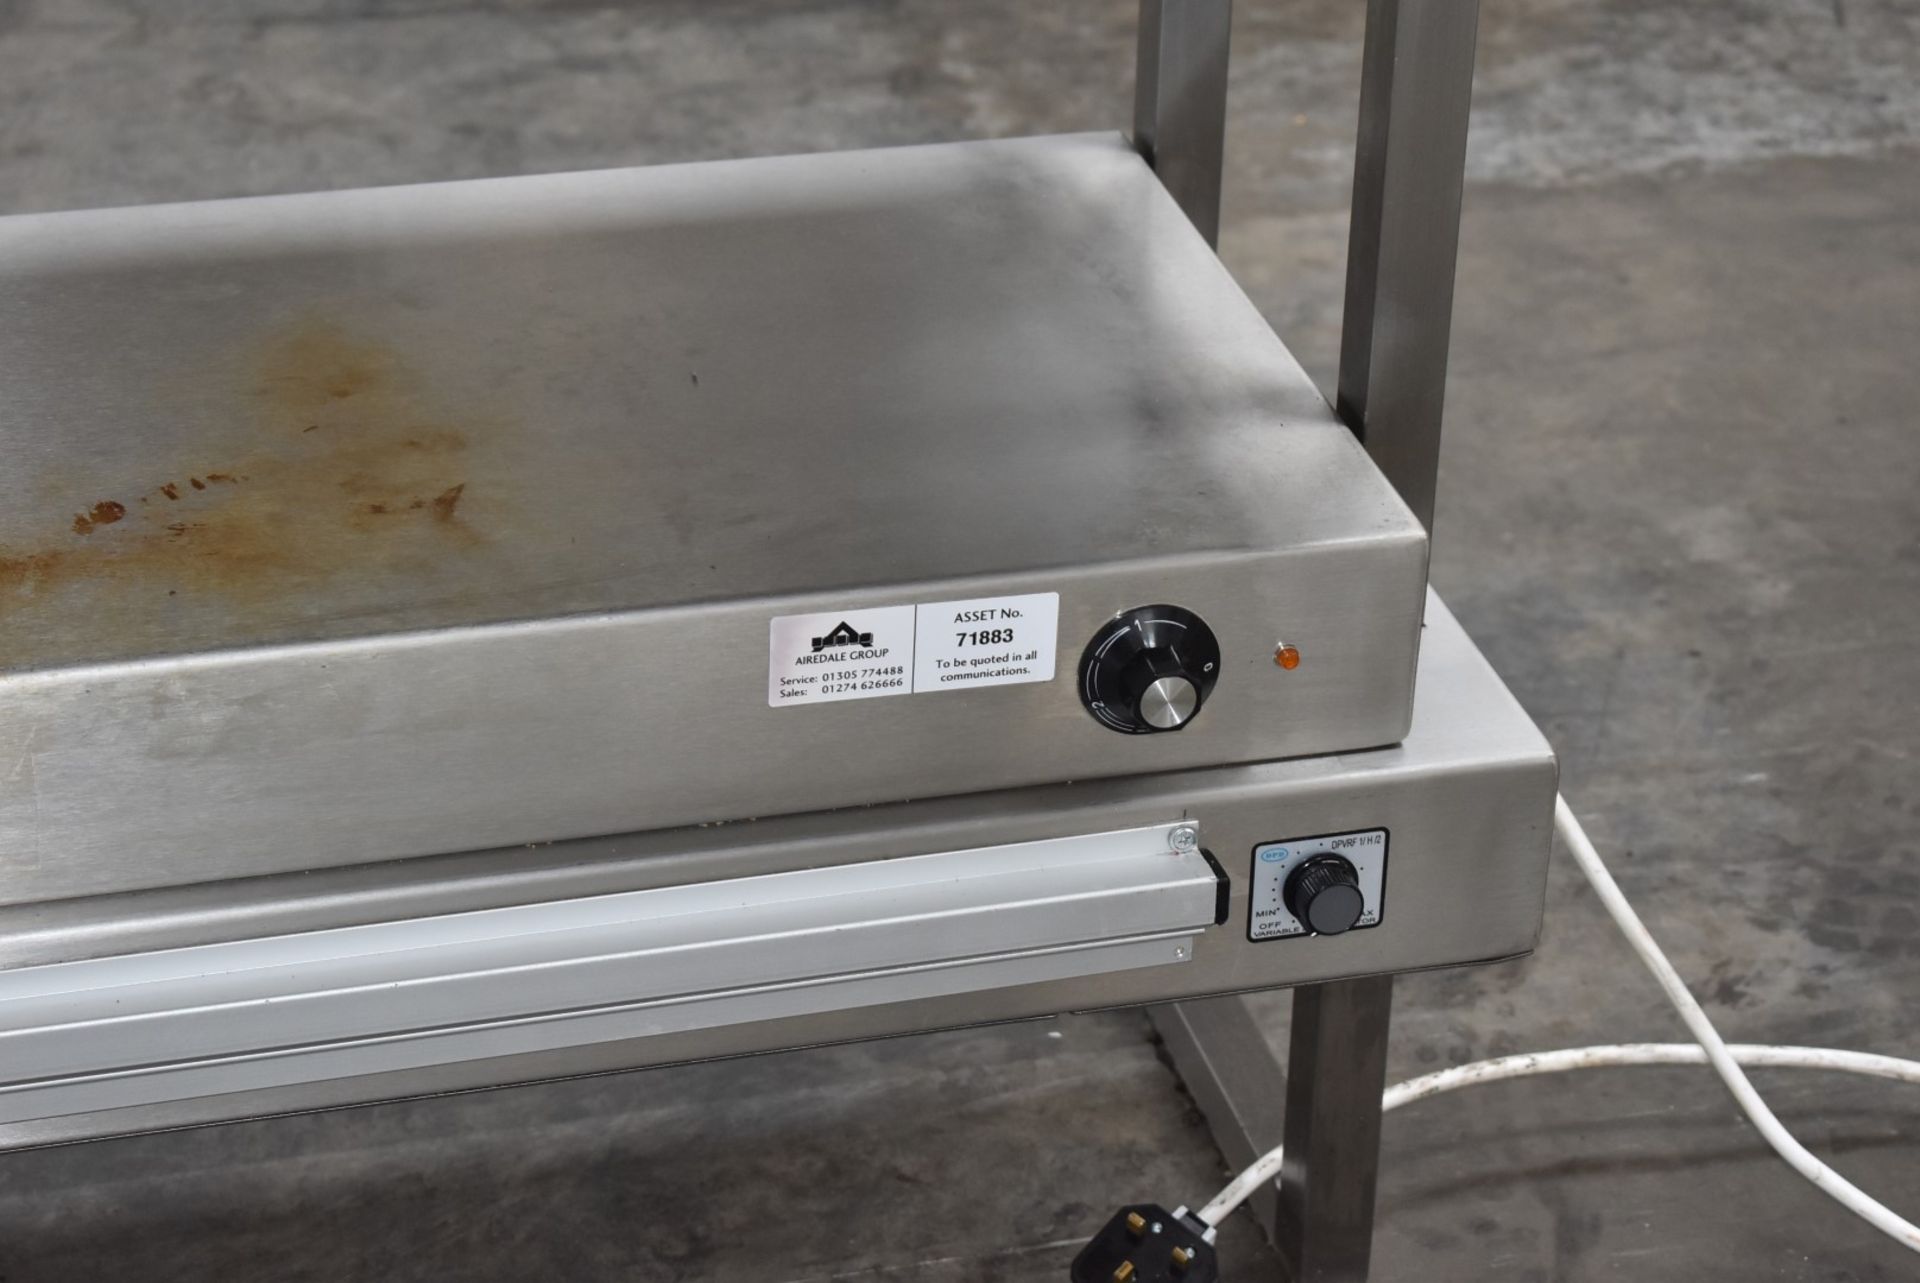 1 x Stainless Steel Bench Mounted Passthrough Food Warmer With Ticket Rails Ref SL254 WH4 - - Image 5 of 5